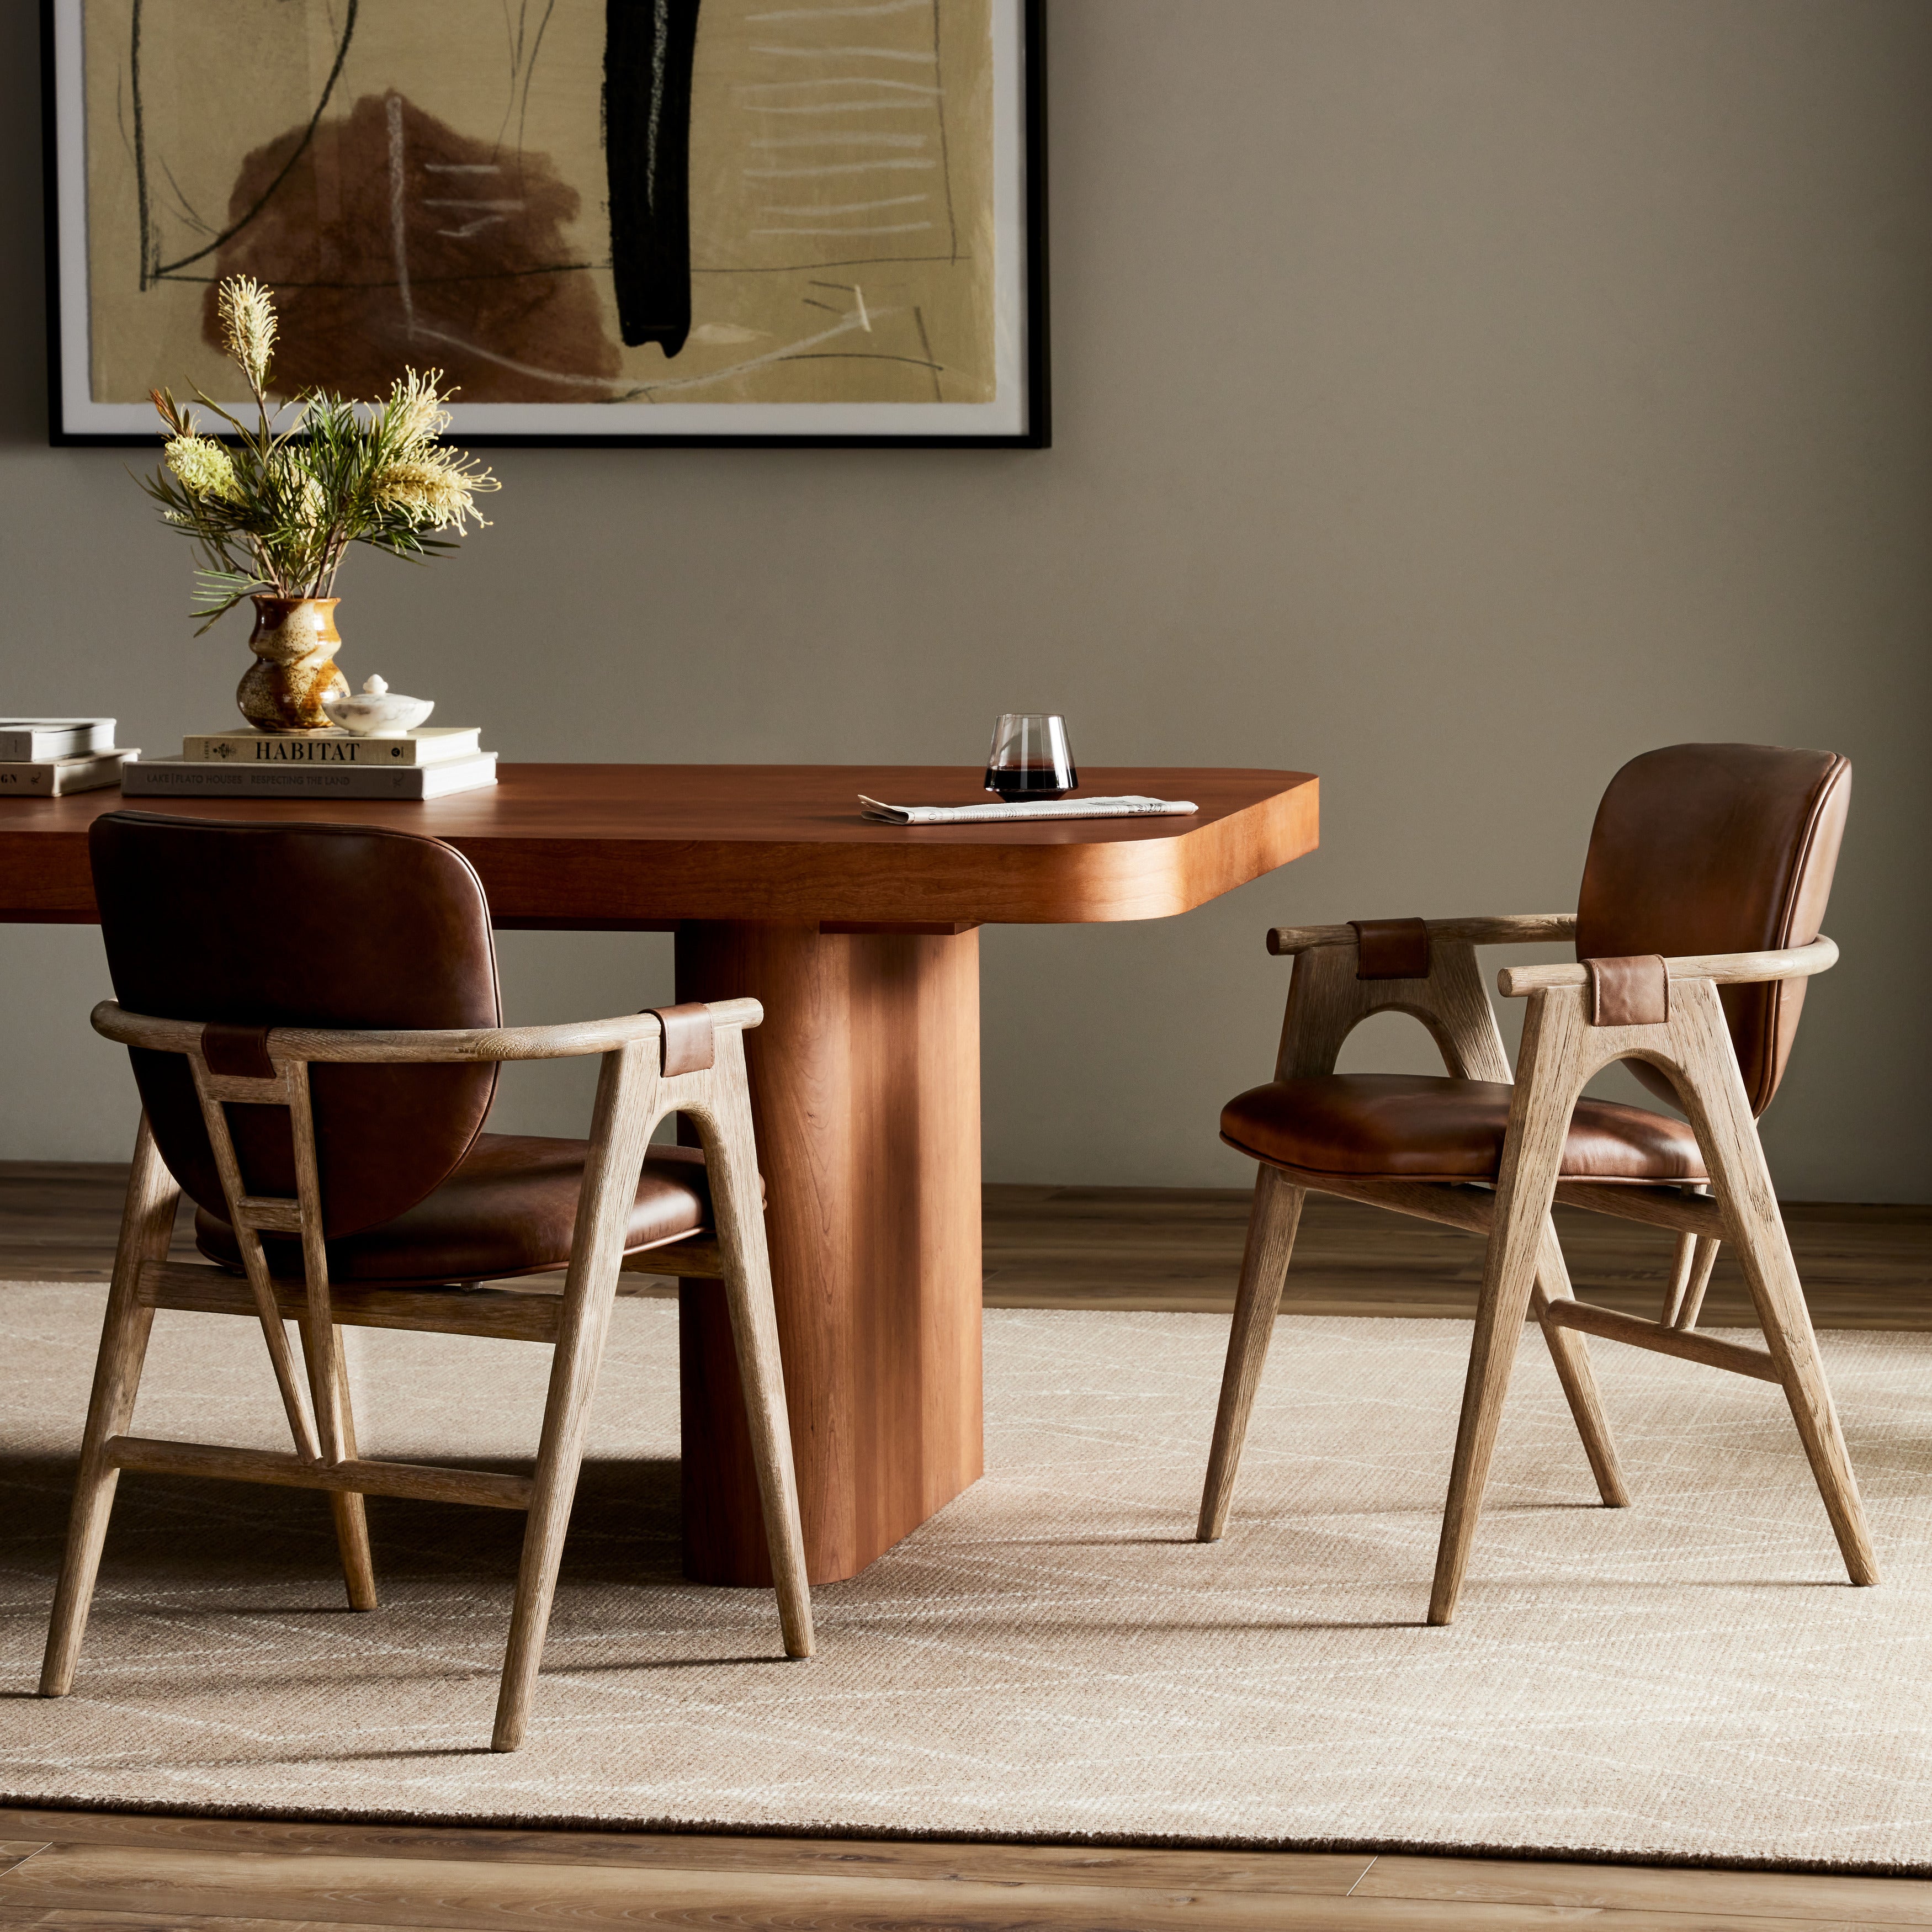 Inspired by Danish midcentury styles, this dining armchair pairs angular framework with soft, rounded seat panels. Seating and arm straps finished in top-grain leather exclusive to Four Hands. Amethyst Home provides interior design, new construction, custom furniture, and area rugs in the Monterey metro area.